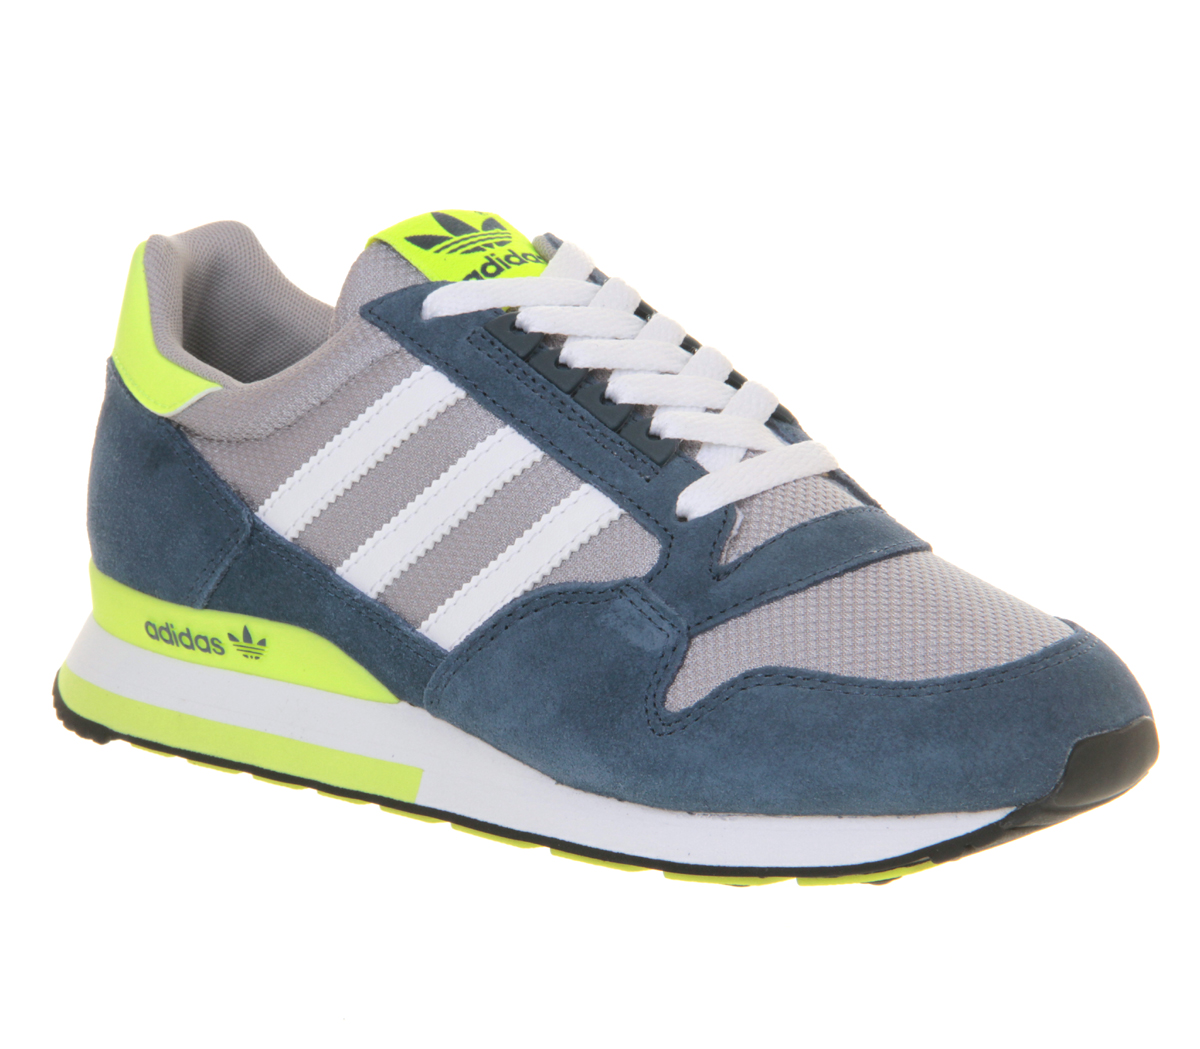 adidas zx 200 for sale